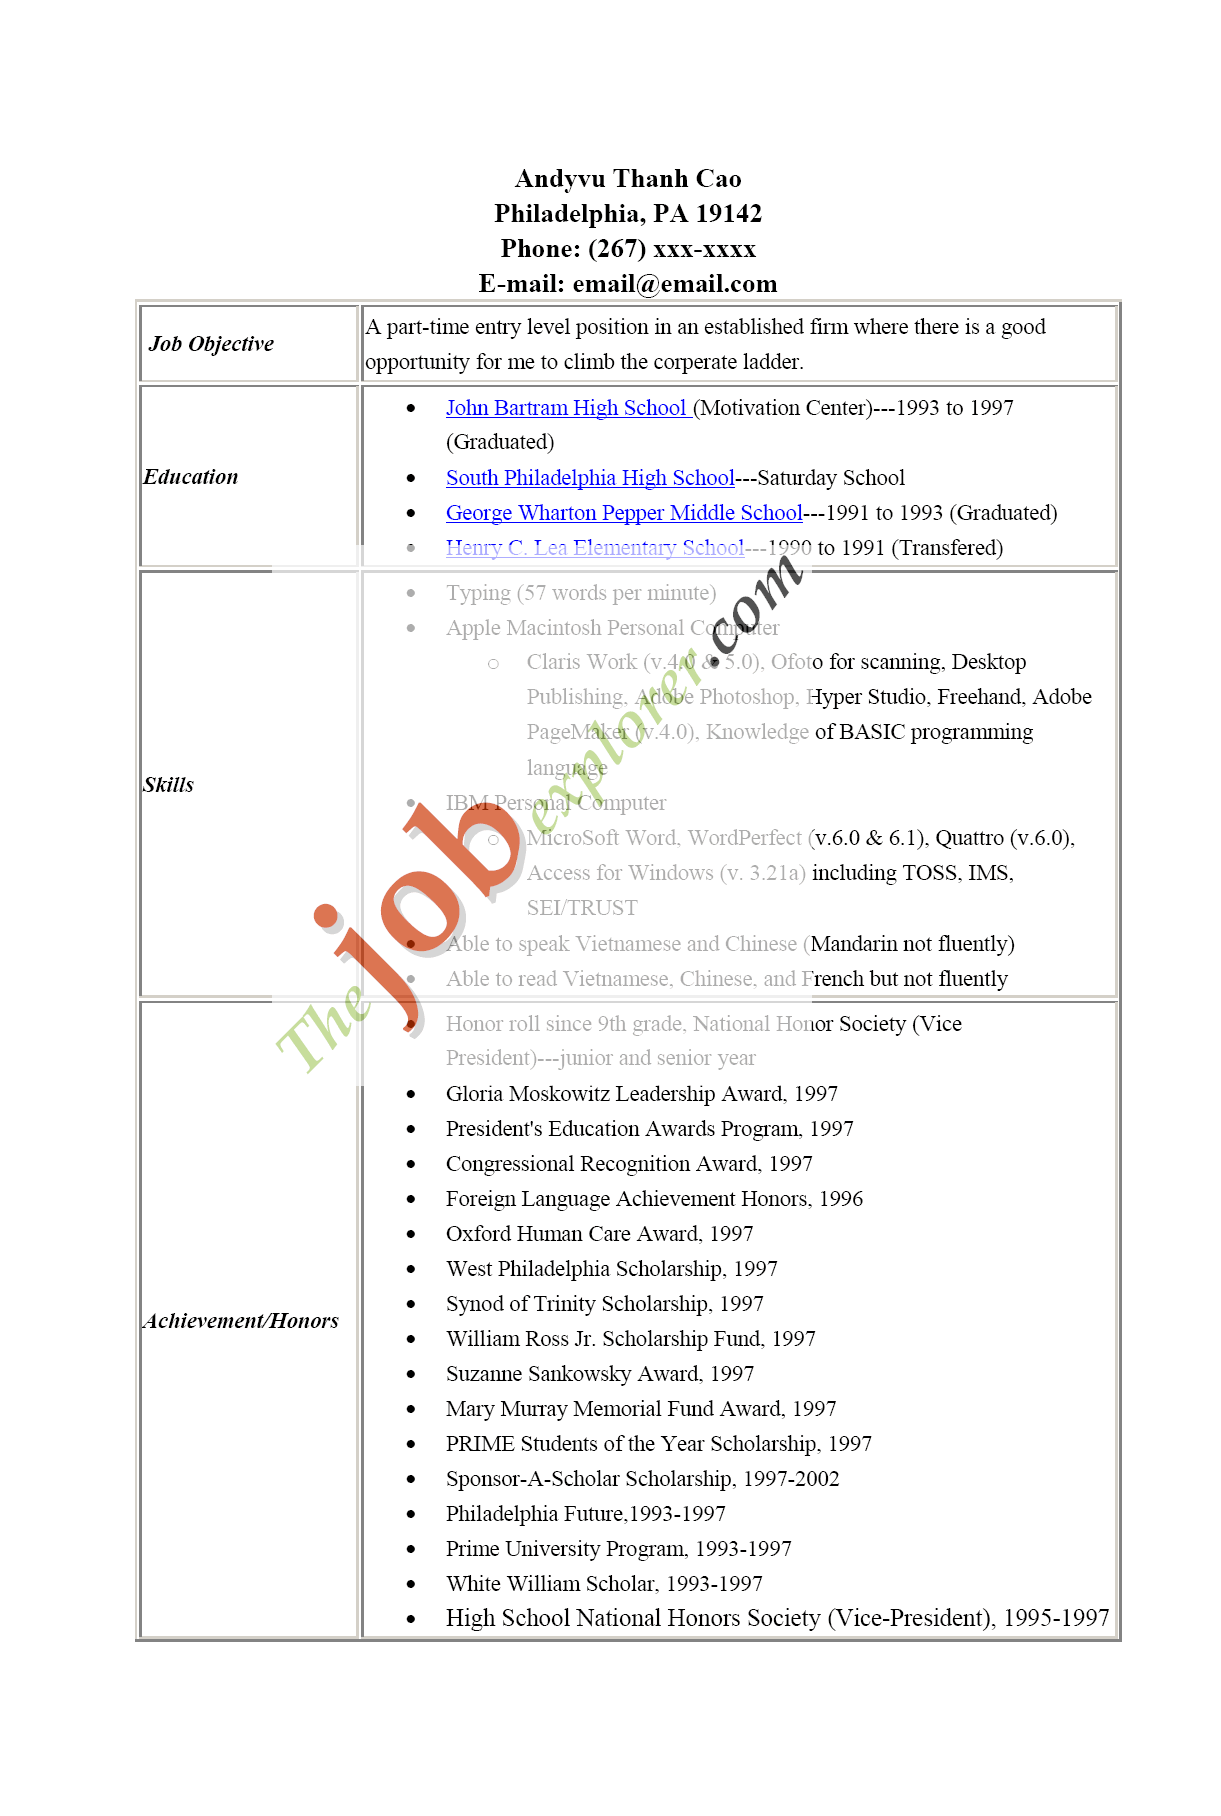 Click Here for a Free Resume Builder